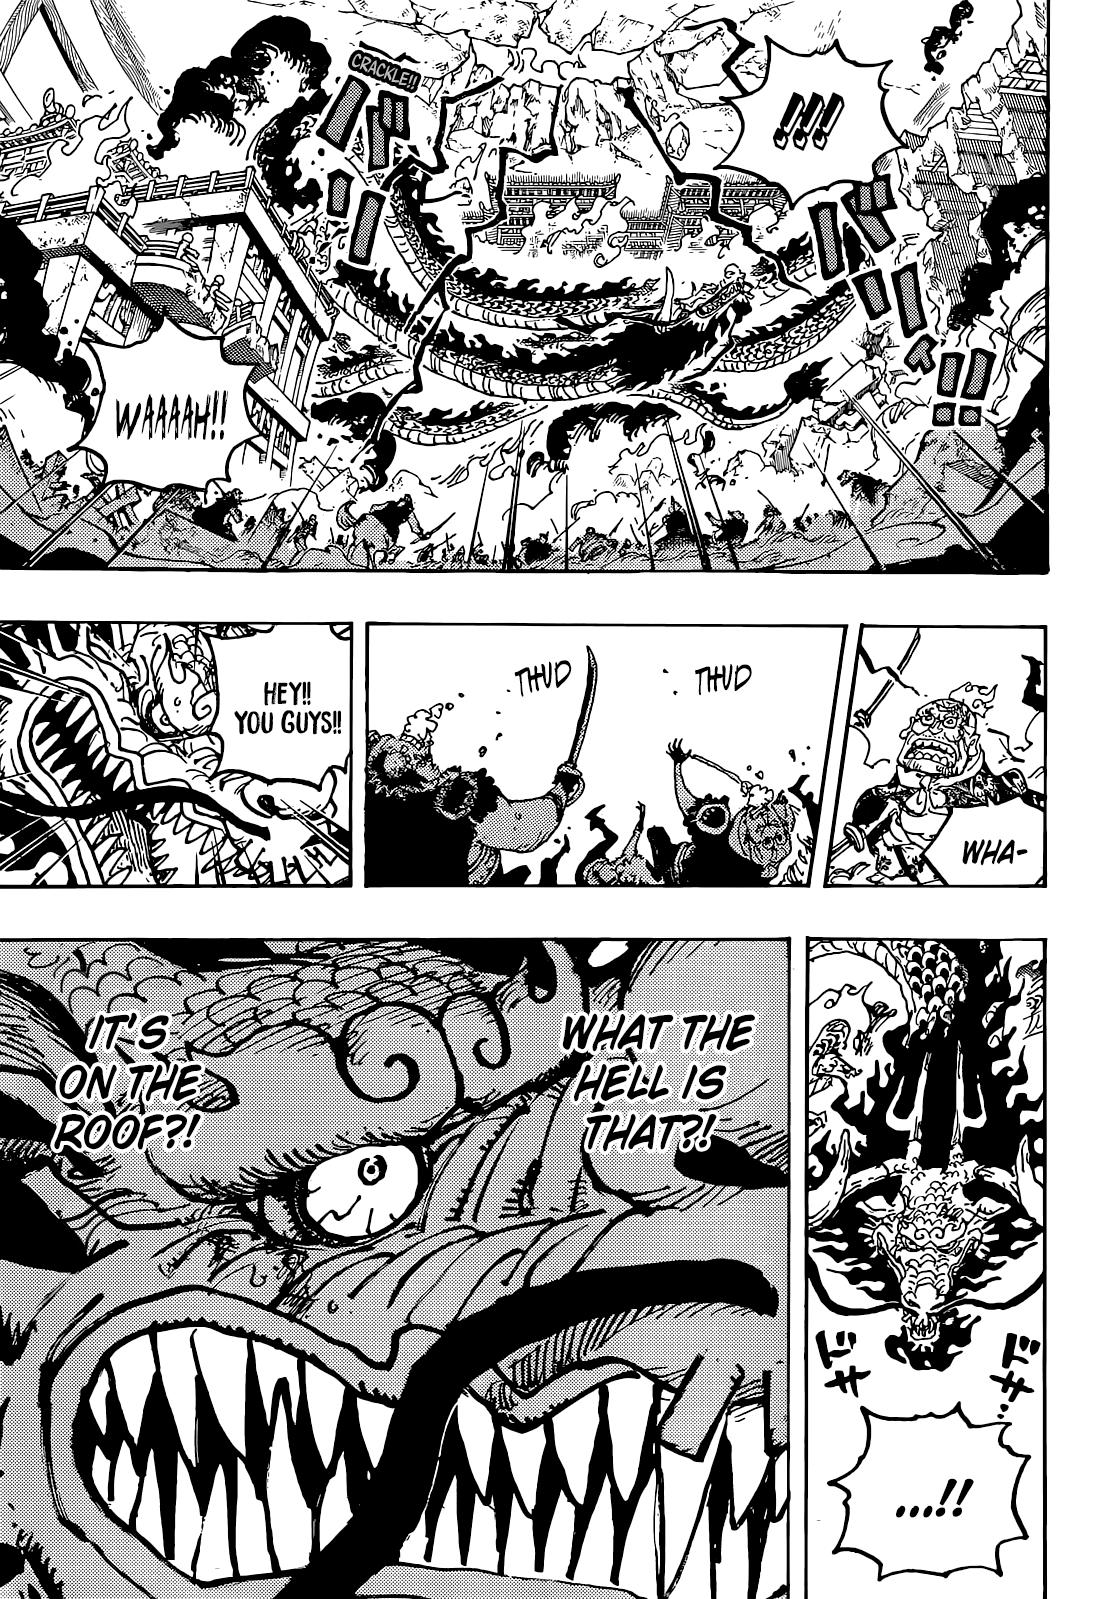 OPspoiler on X: One Piece Chapter 1044 English Translation (Not